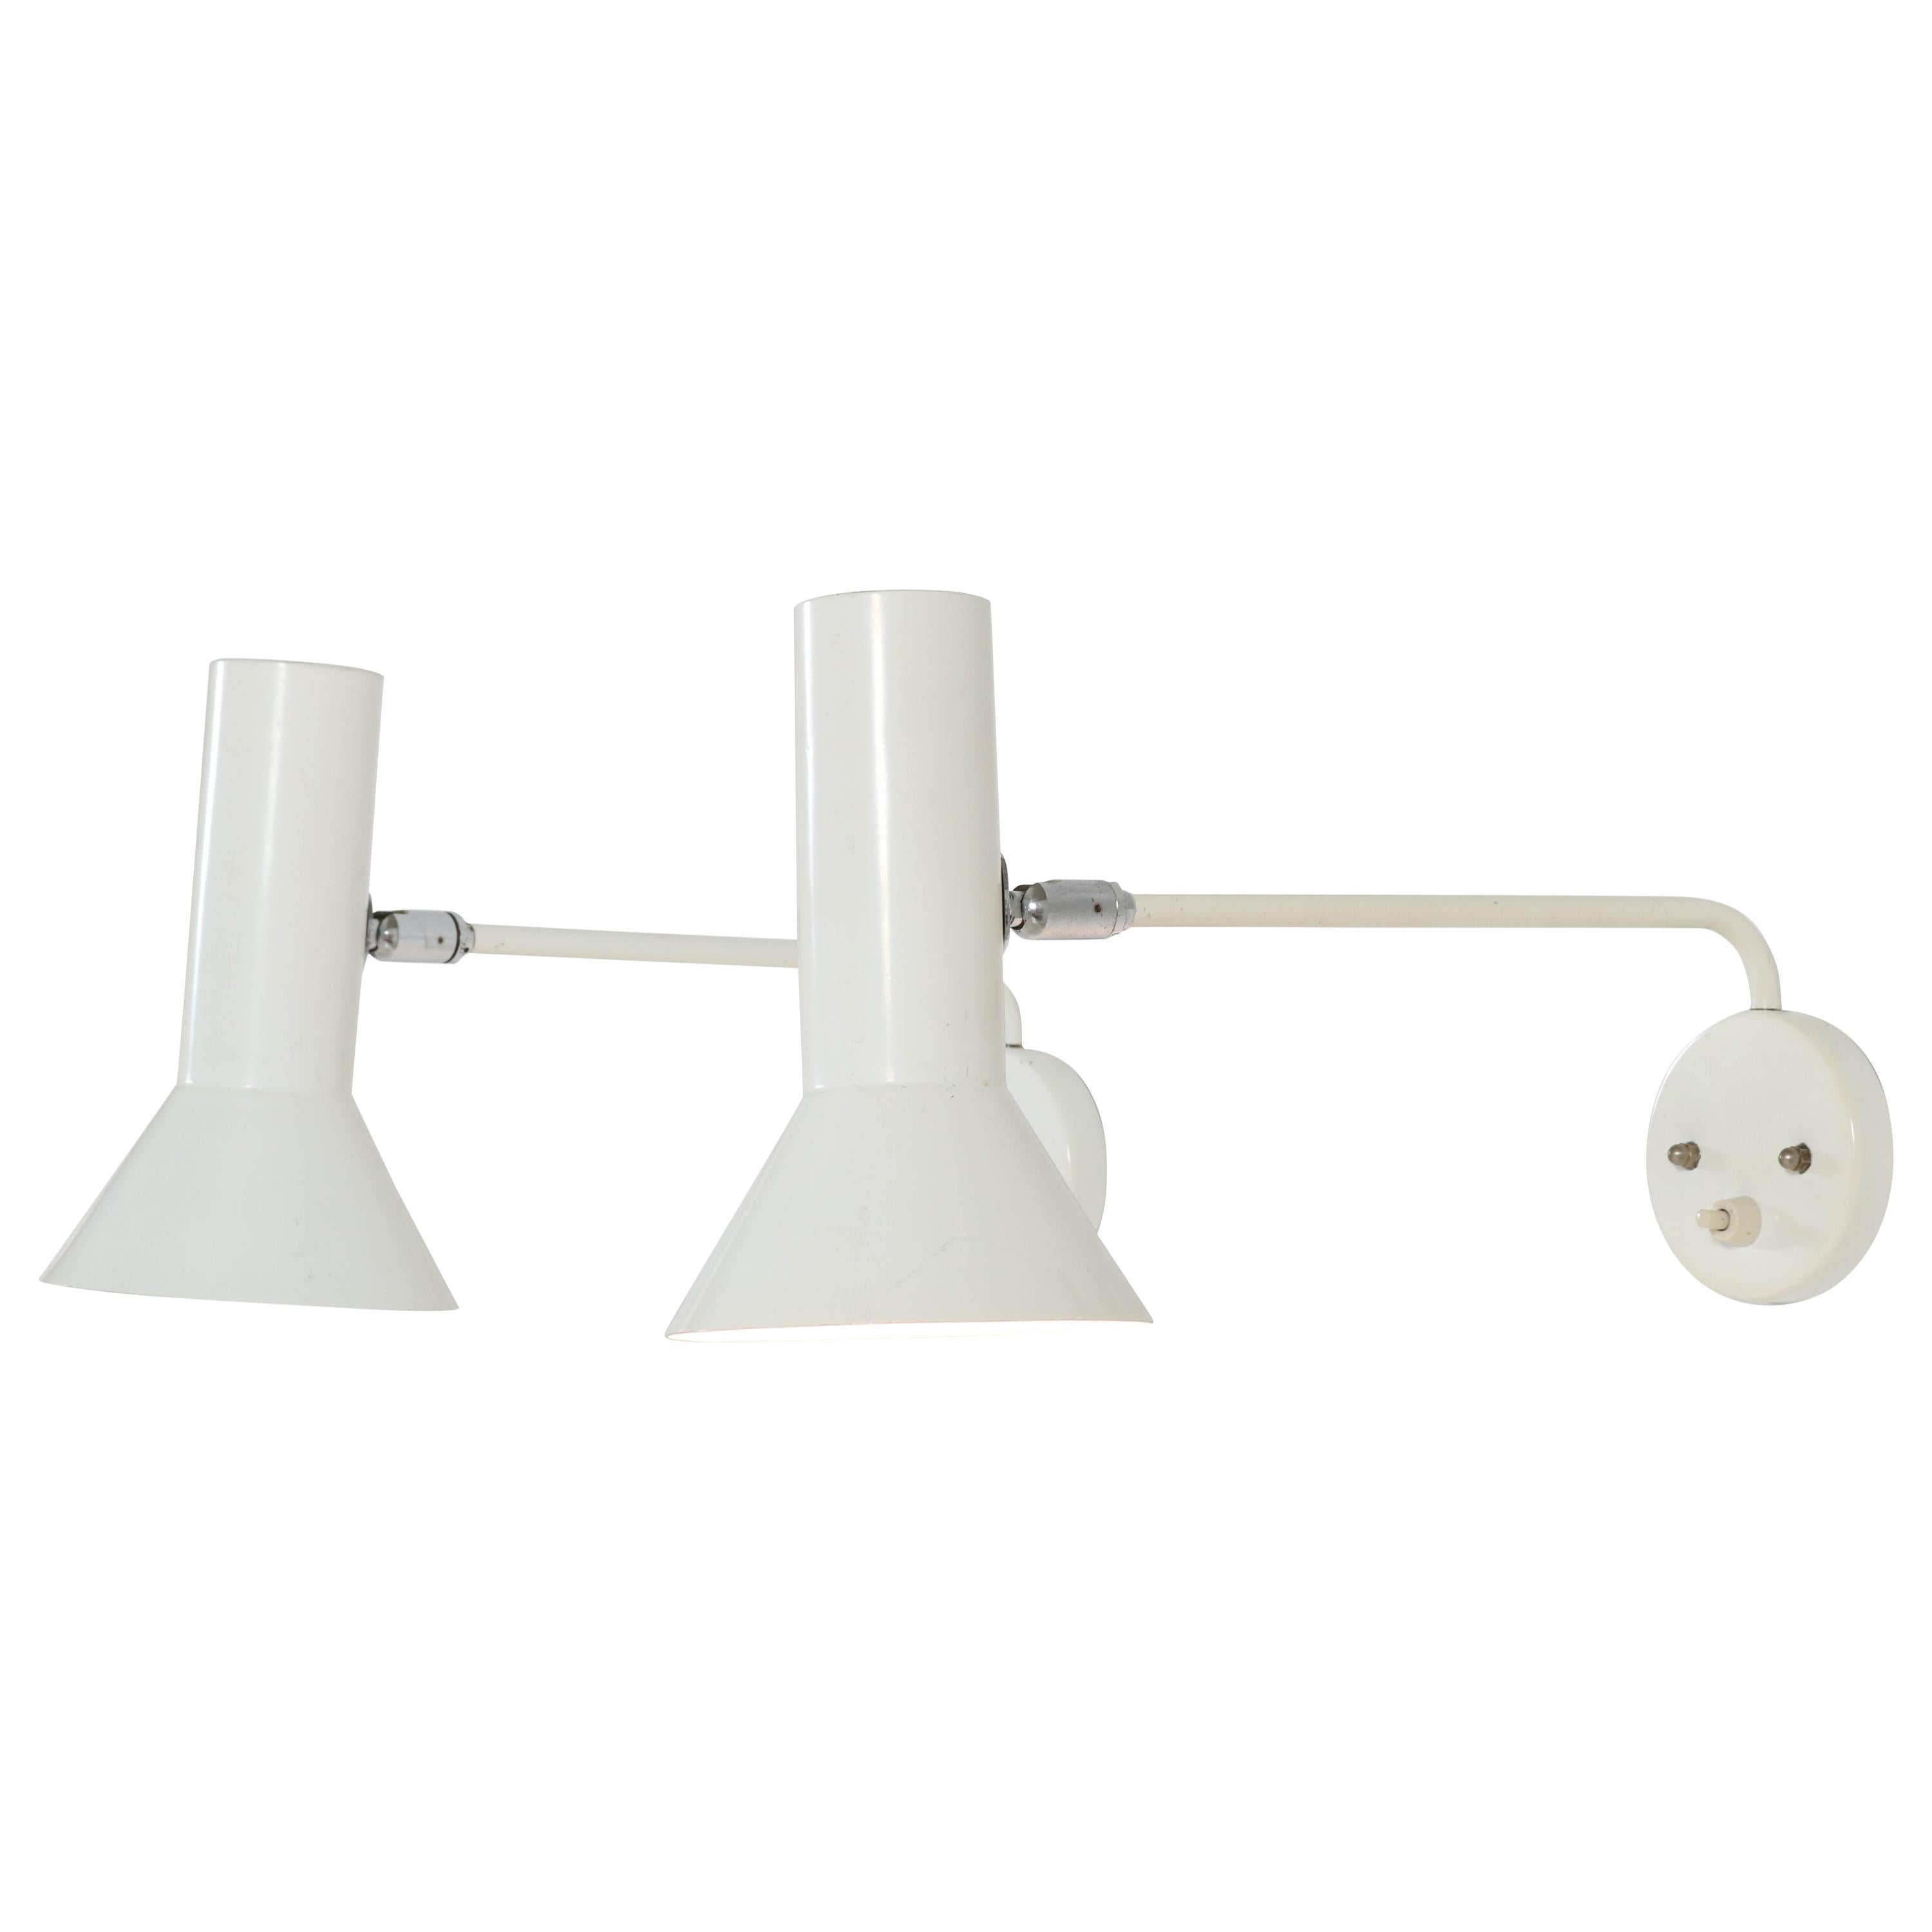 Two Mid-Century Modern Wall Lights or Sconces by RAAK, Amsterdam, 1960s